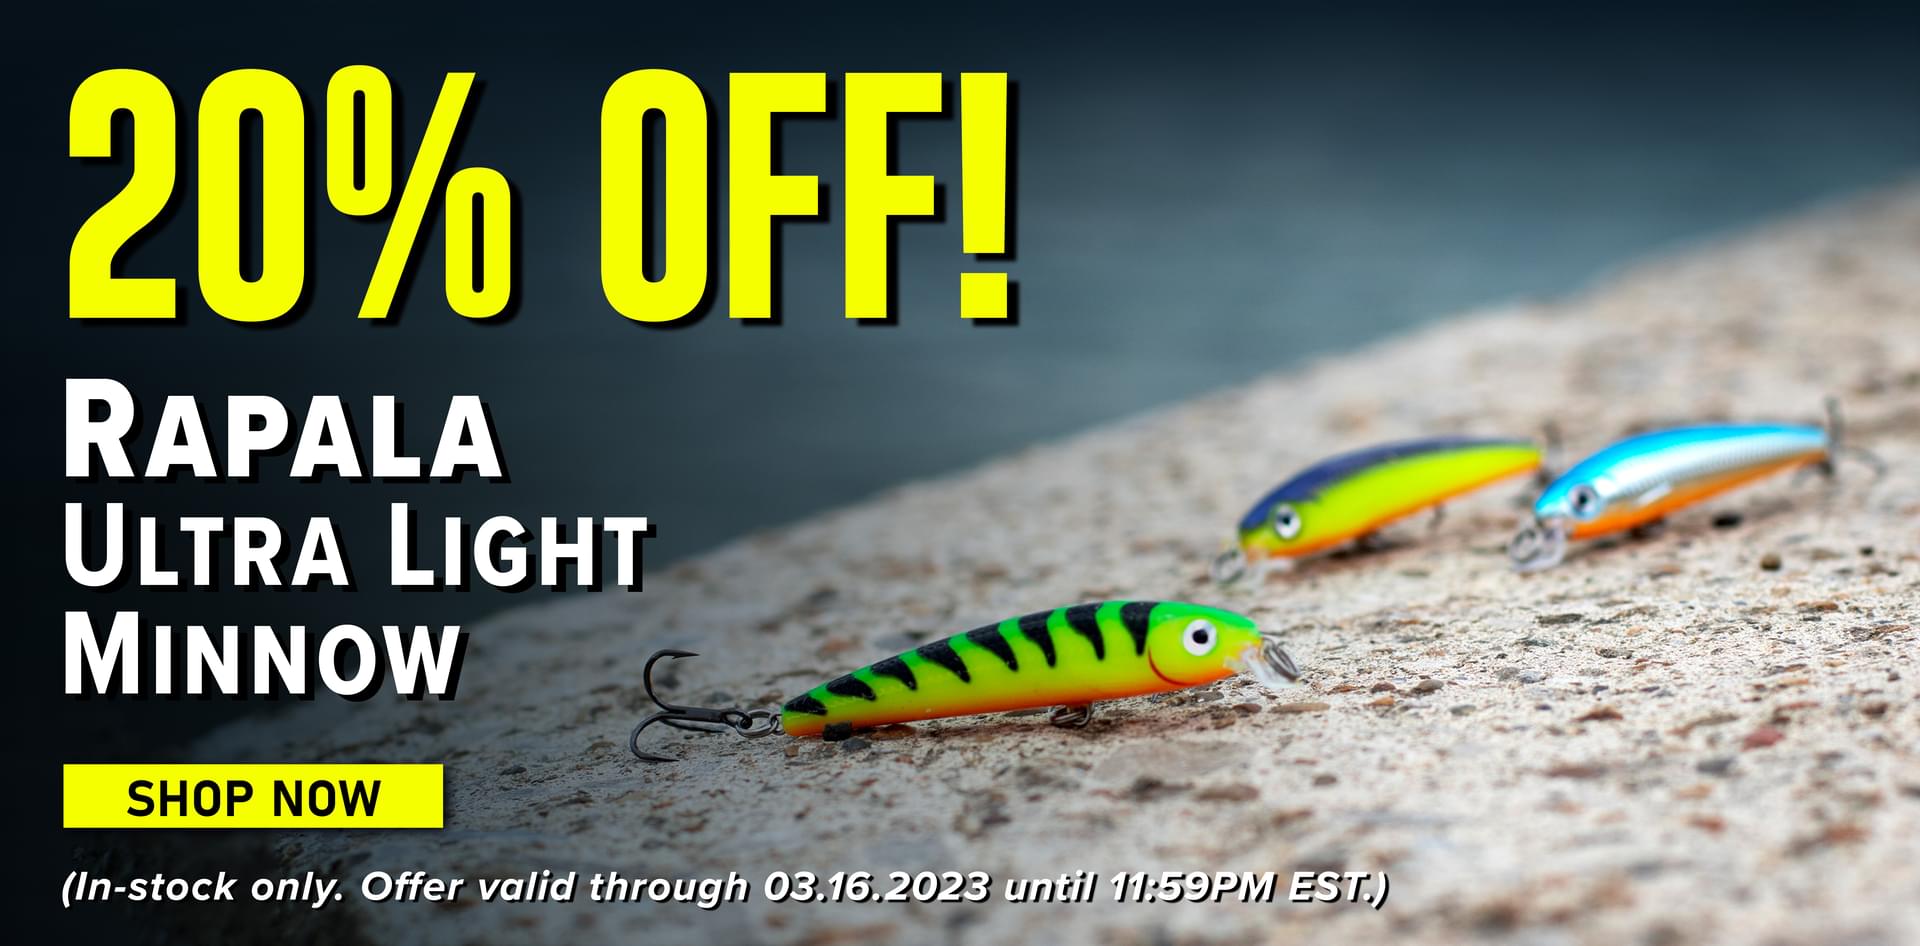 20% Off!  Rapala Ultra Light Minnow Shop Now (In-stock only. Offer valid through 03.16.2023 until 11:59PM EST.) RAPALA ULTRA LIGHT MINNOW, 